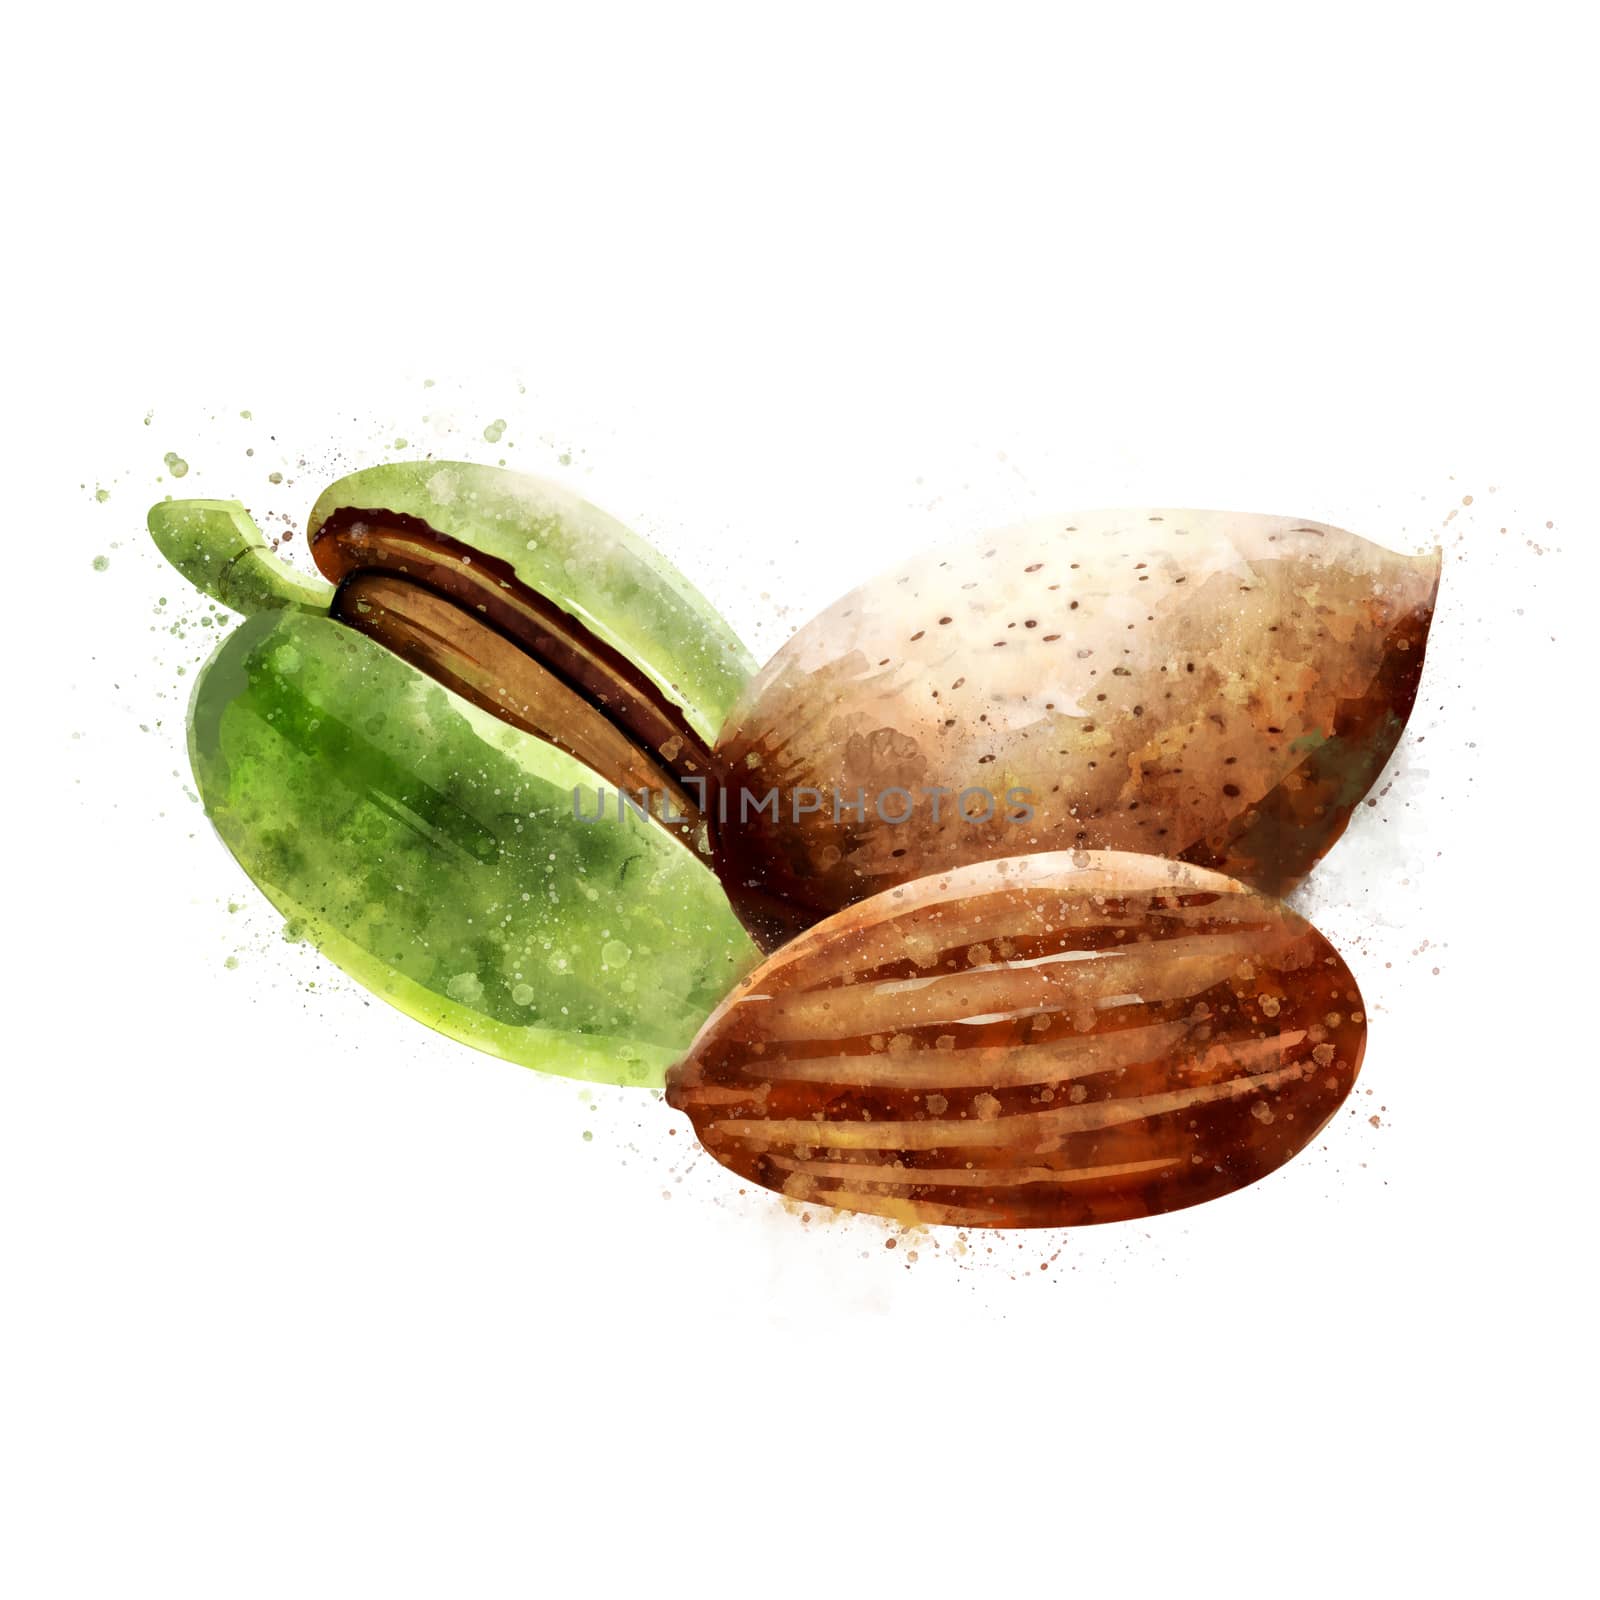 Almond on white background. Watercolor illustration by ConceptCafe